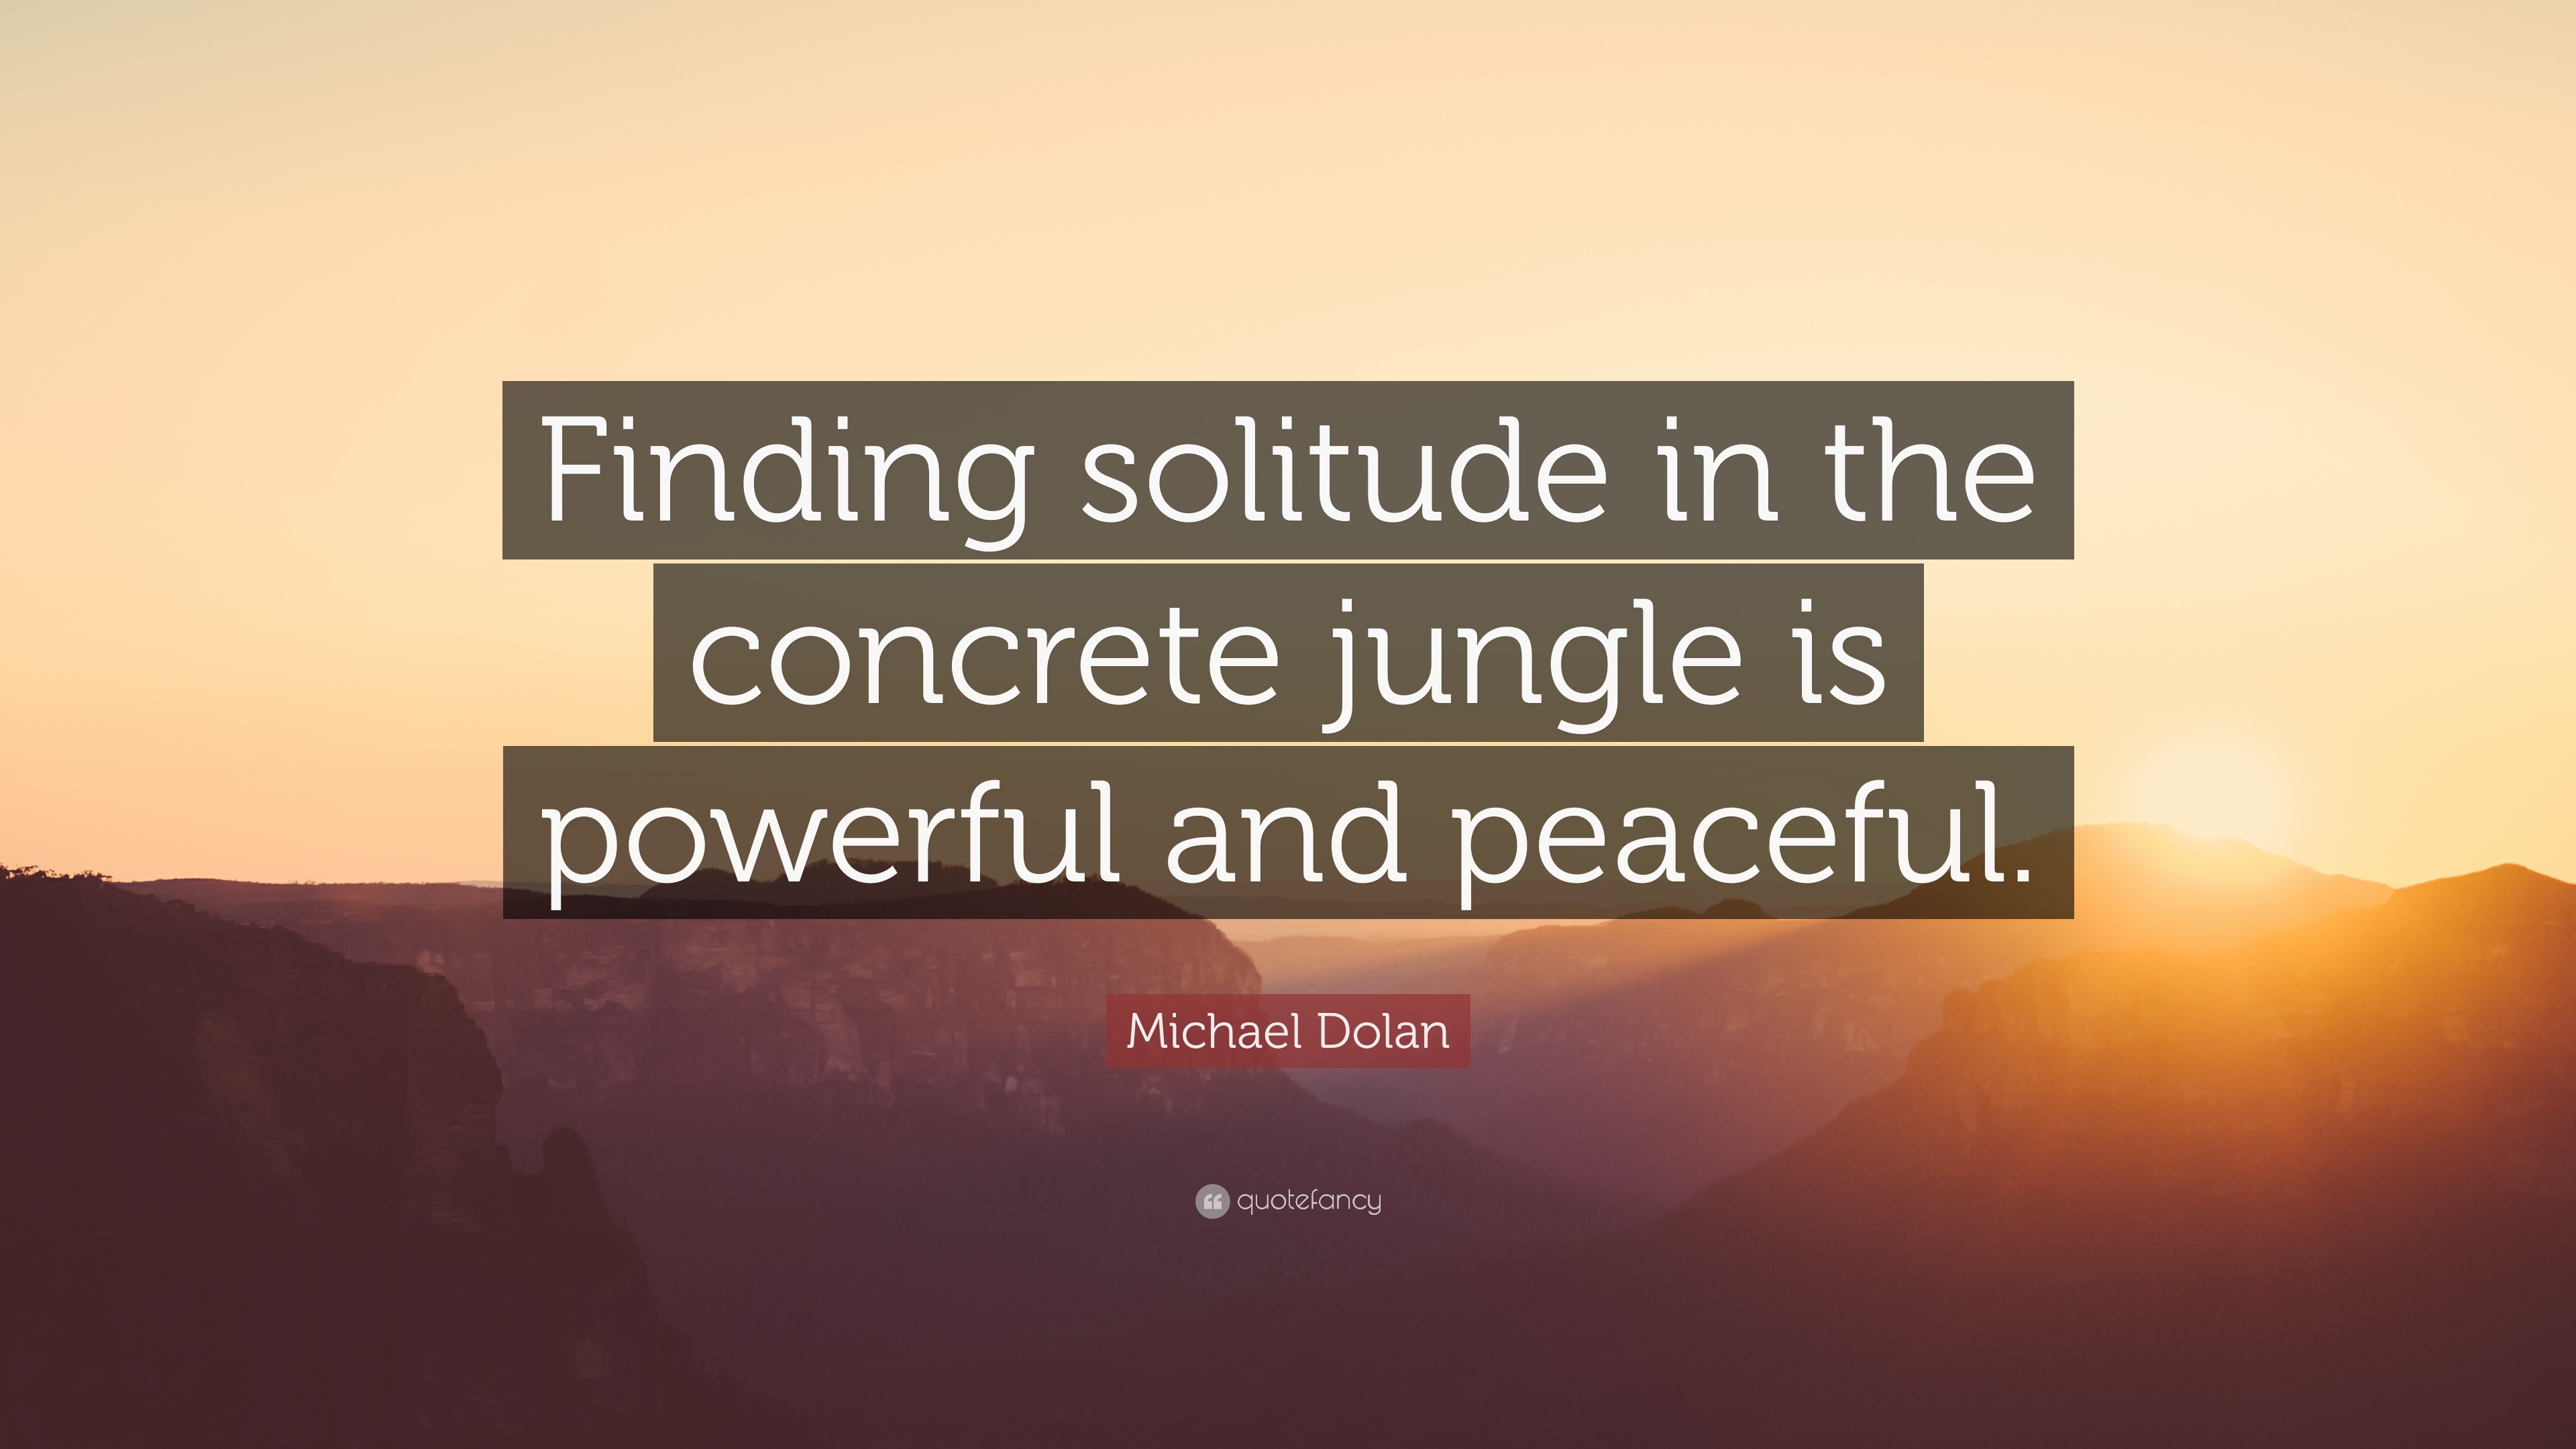 Dolan michael discipline affirmation beginning without solitude jungle finding concrete delusion quote peaceful powerful rohn jim wallpapers quotefancy quotes